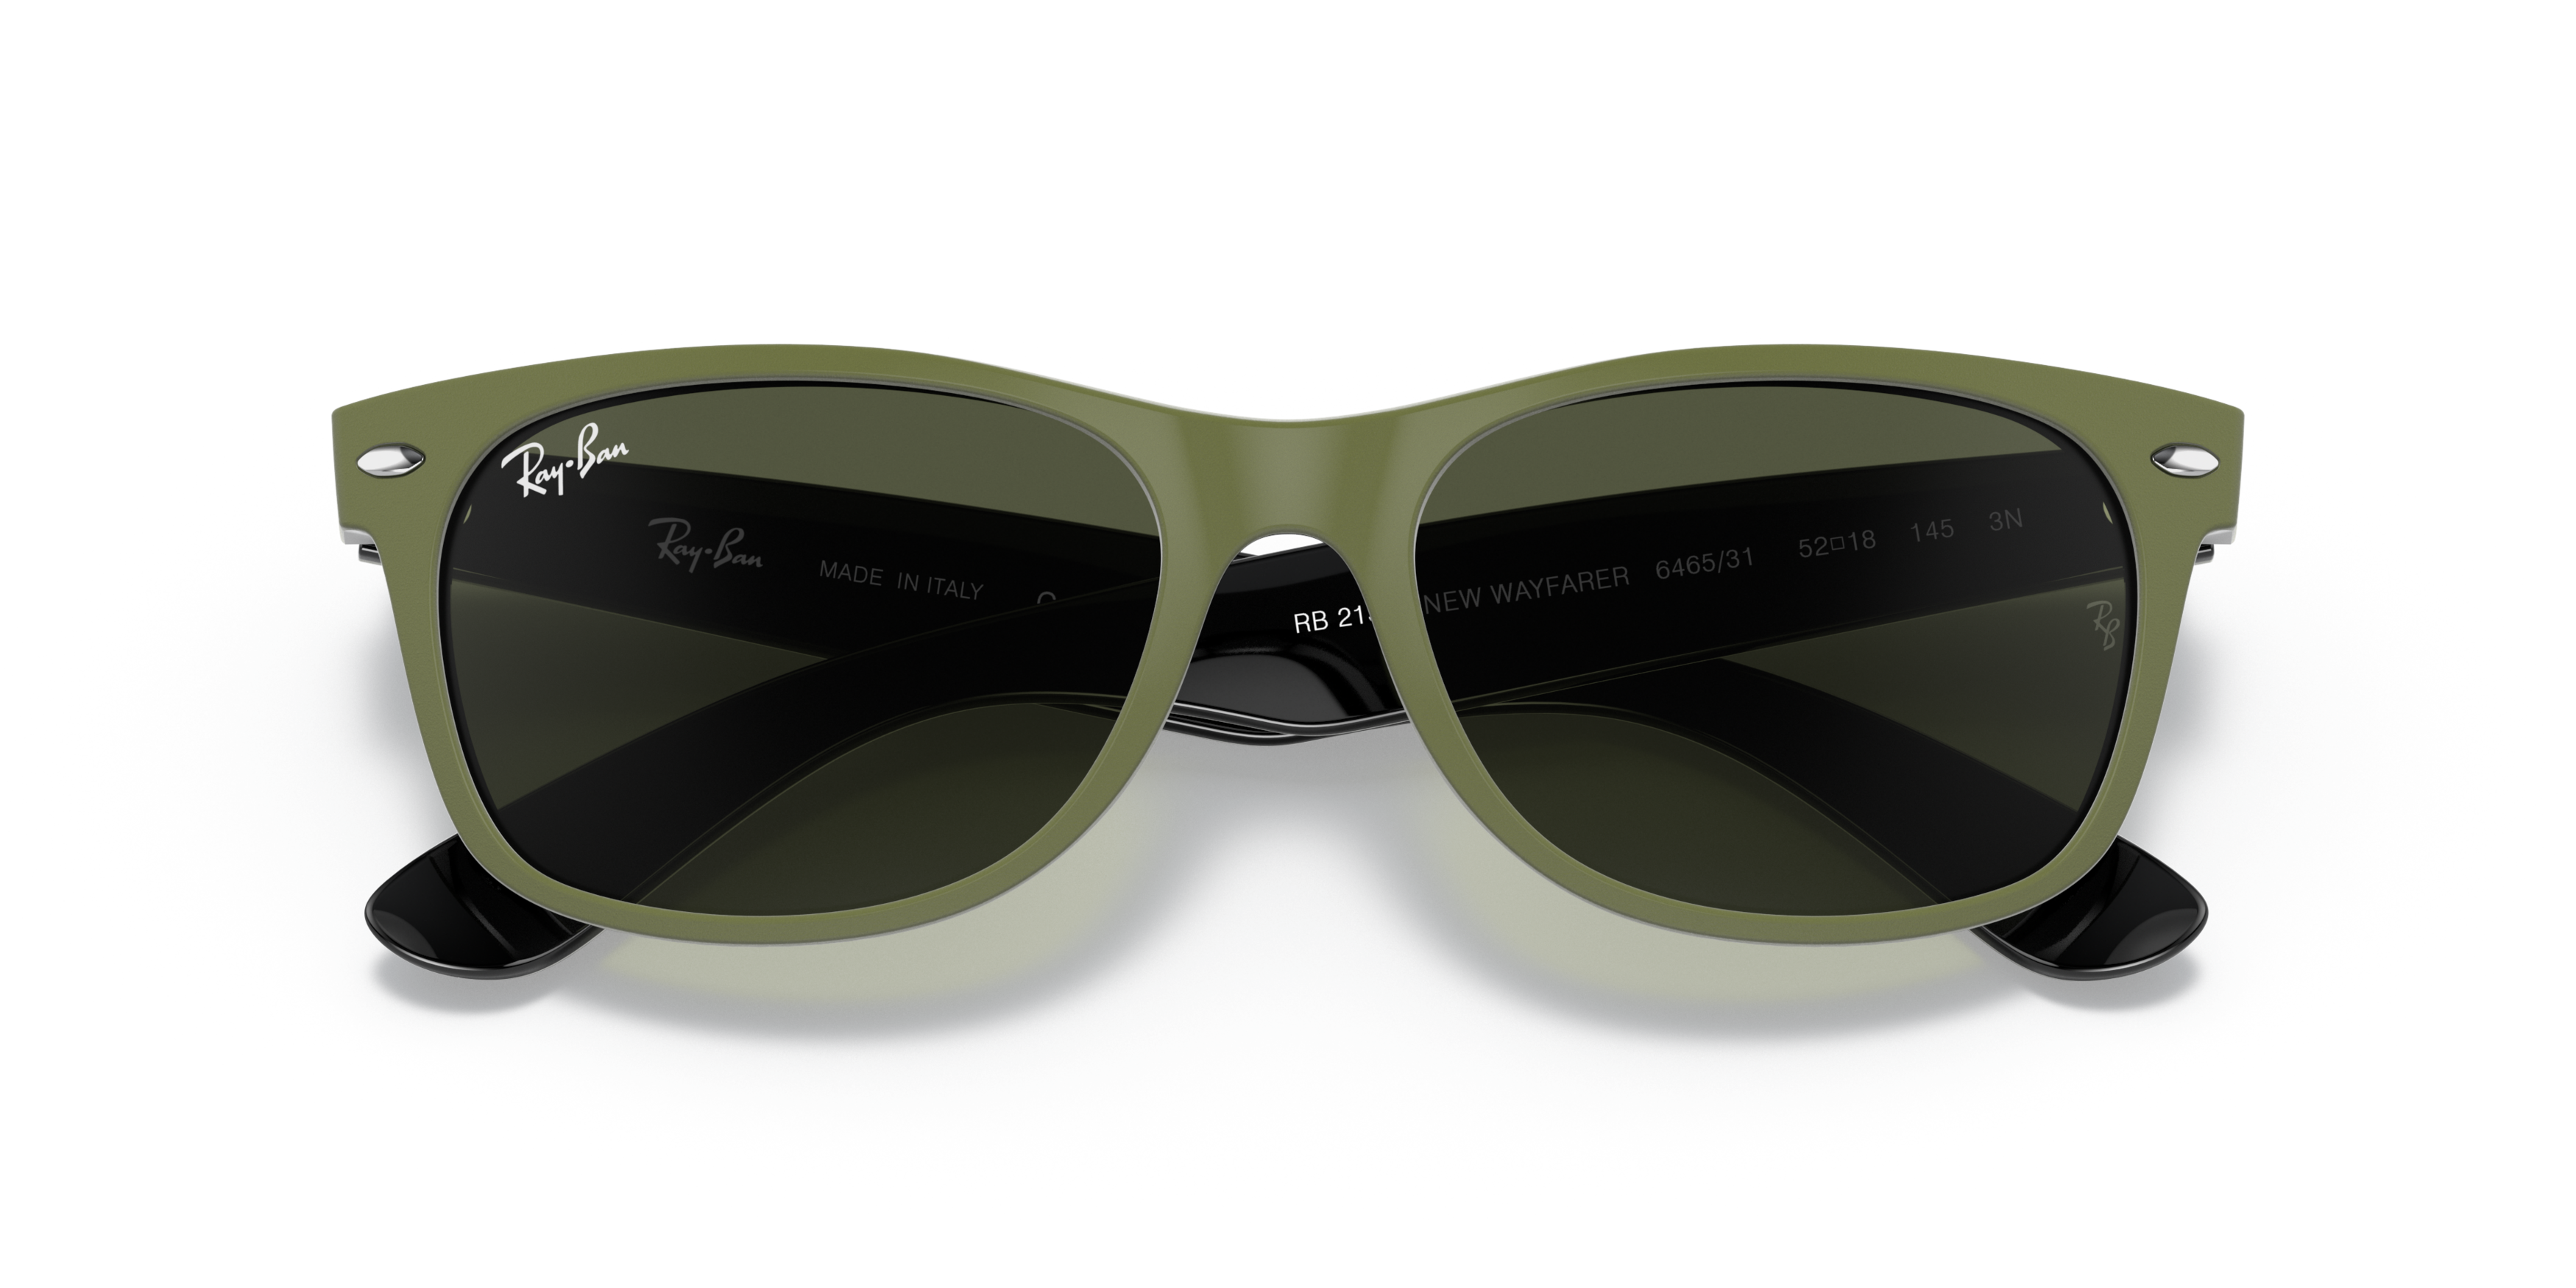 [products.image.folded] Ray-Ban New Wayfarer Color Mix RB2132 646531